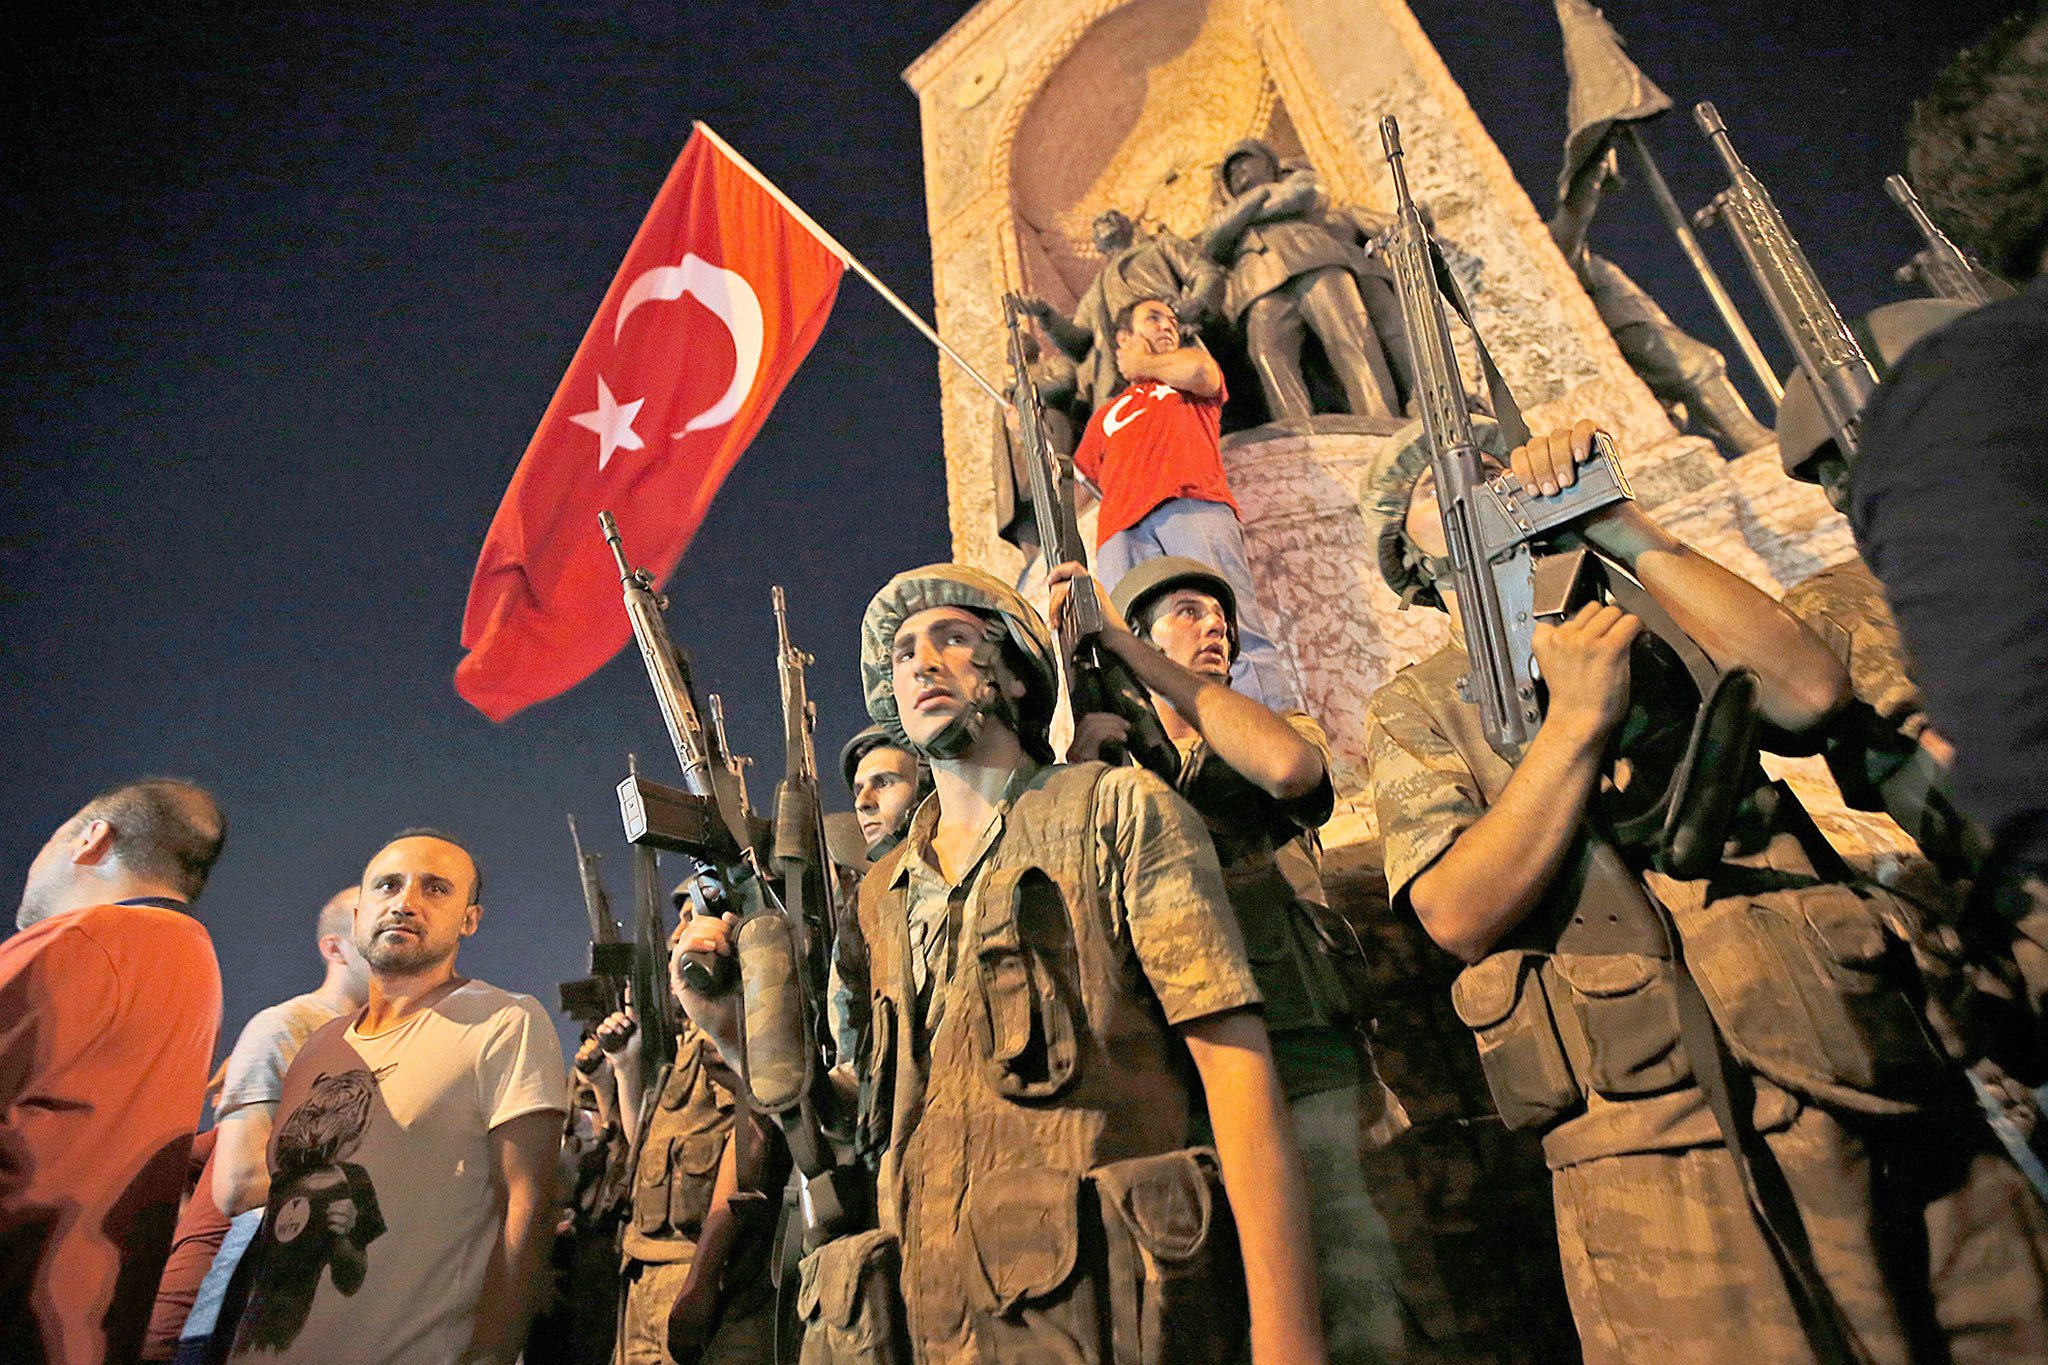 Turkish soldiers secure the area as supporters of Turkey’s President Recep Tayyip Erdogan protest in Istanbul’s Taksim square early Saturday. (AP Photo/Emrah Gurel)